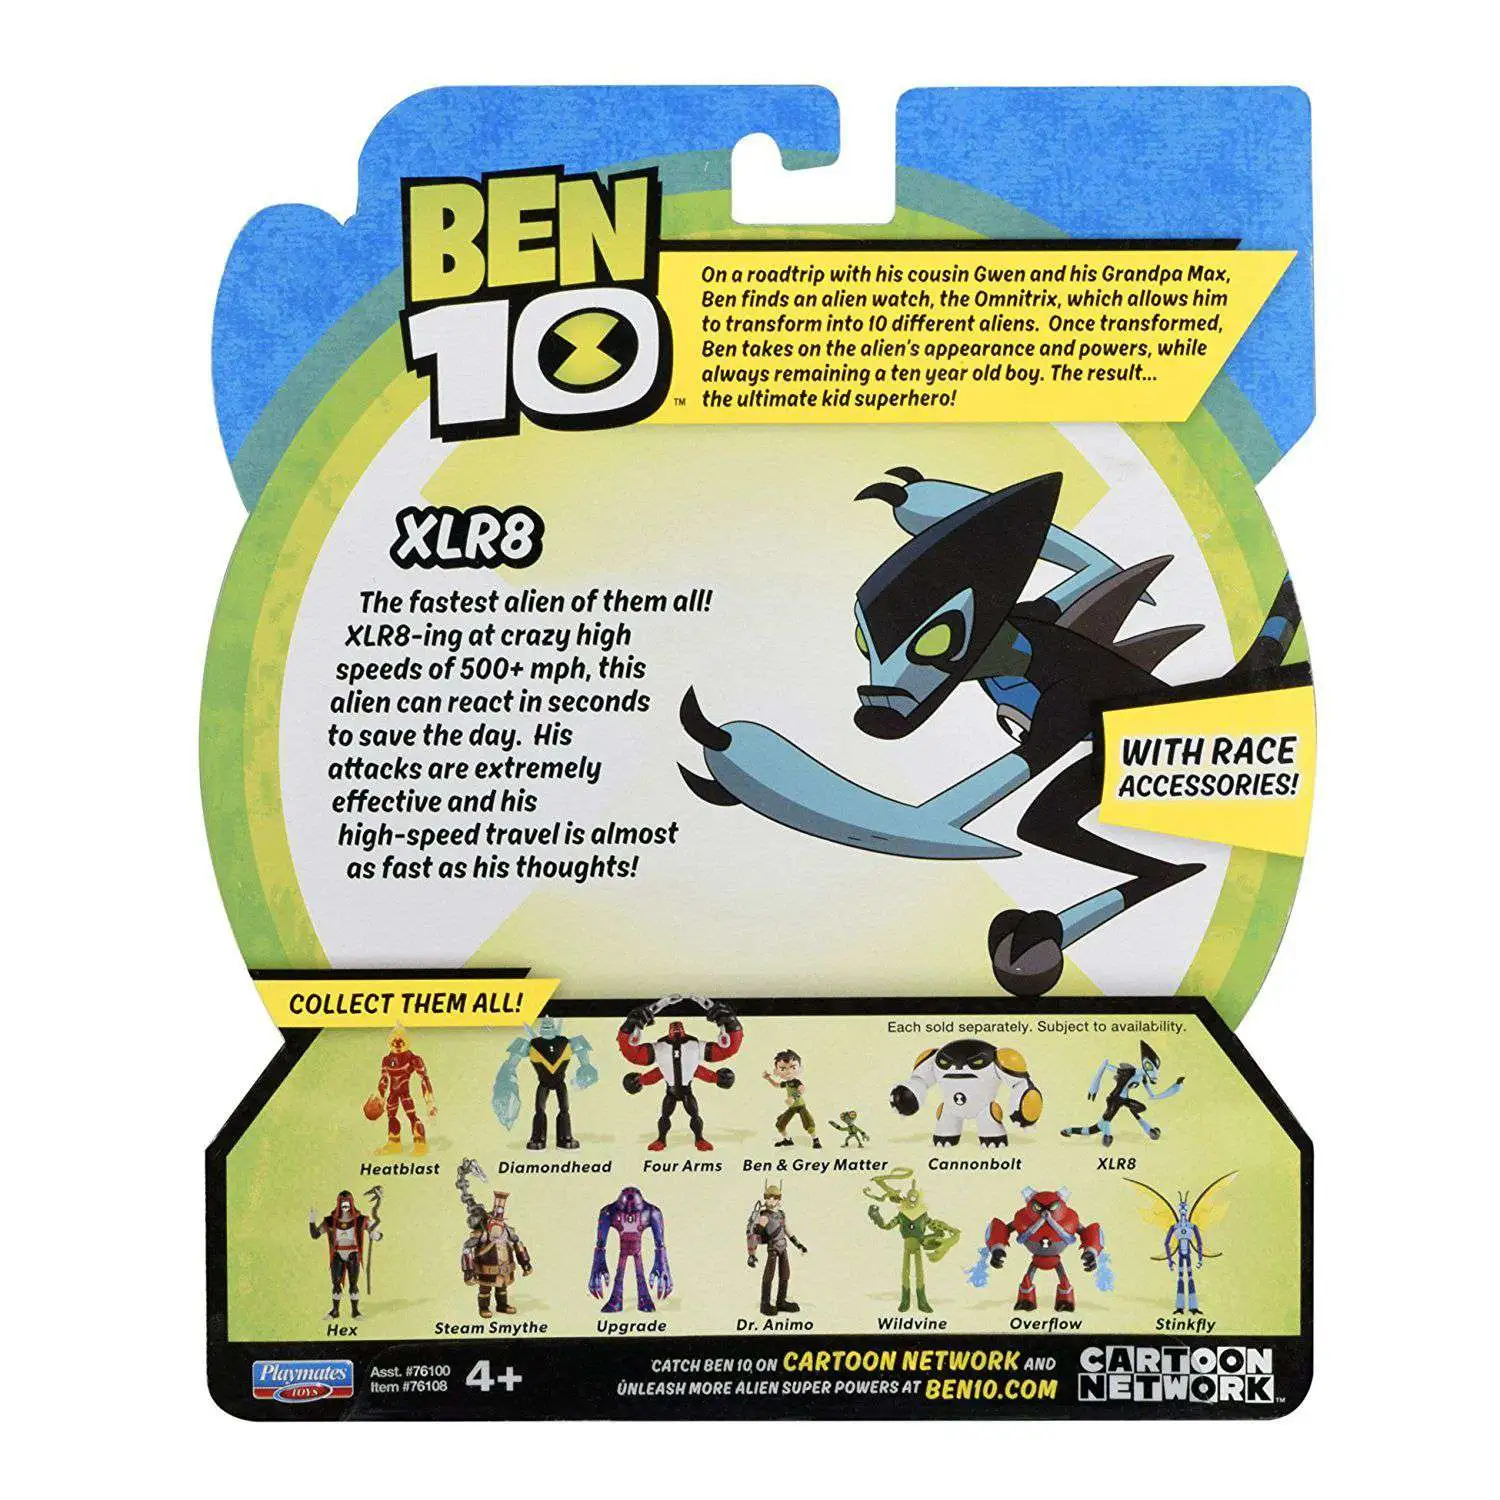 Ben 10 XLR8 With Race Accessories 12 cm 5 in Action Figure #76108 Brand New 